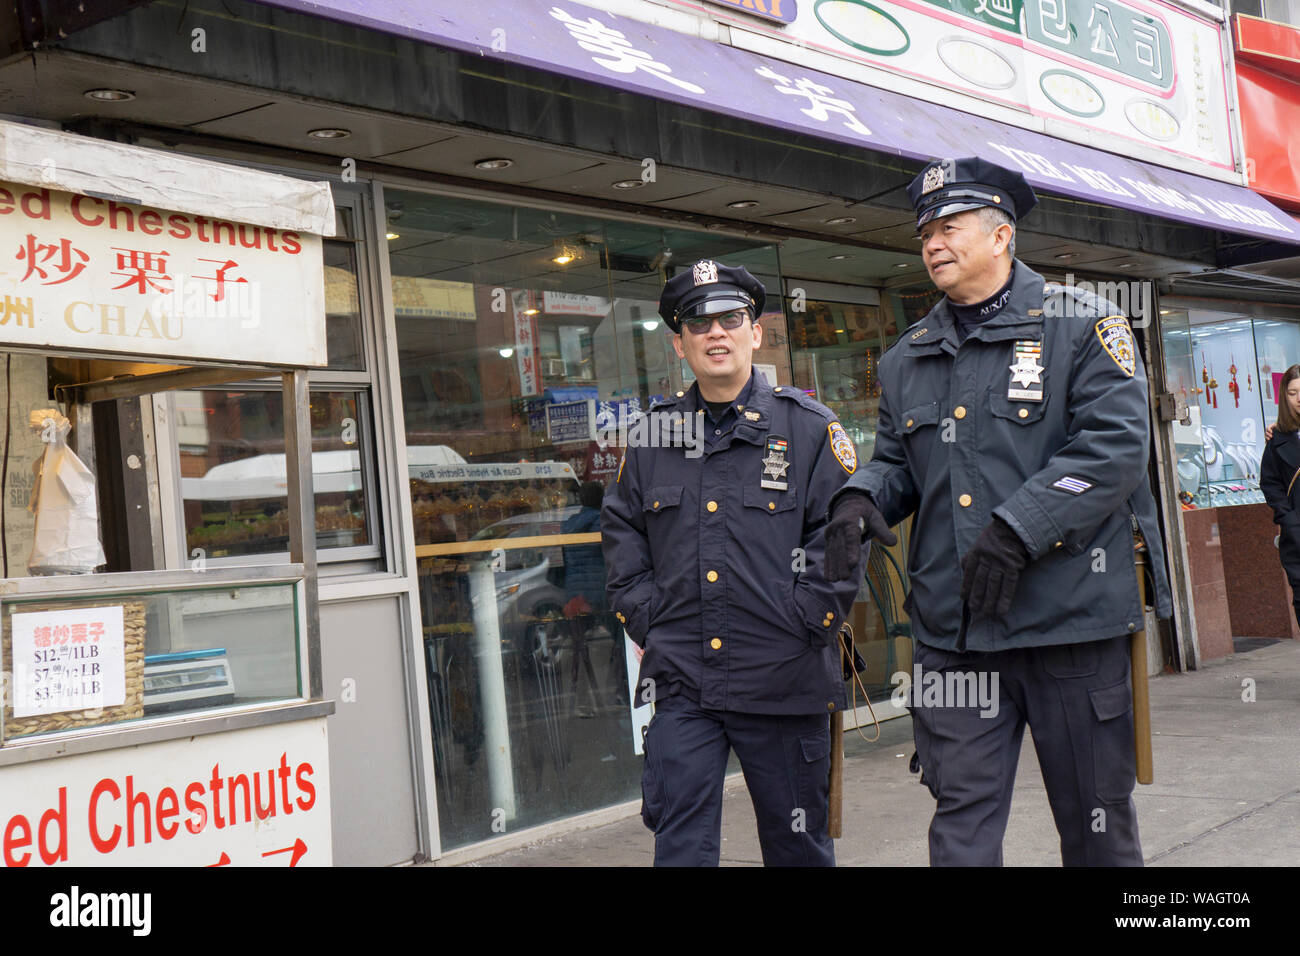 Two Asian American Auxiliary policemen walk down Main Street chatting. In Chinatown, Flushing, Queens, New York. Stock Photo